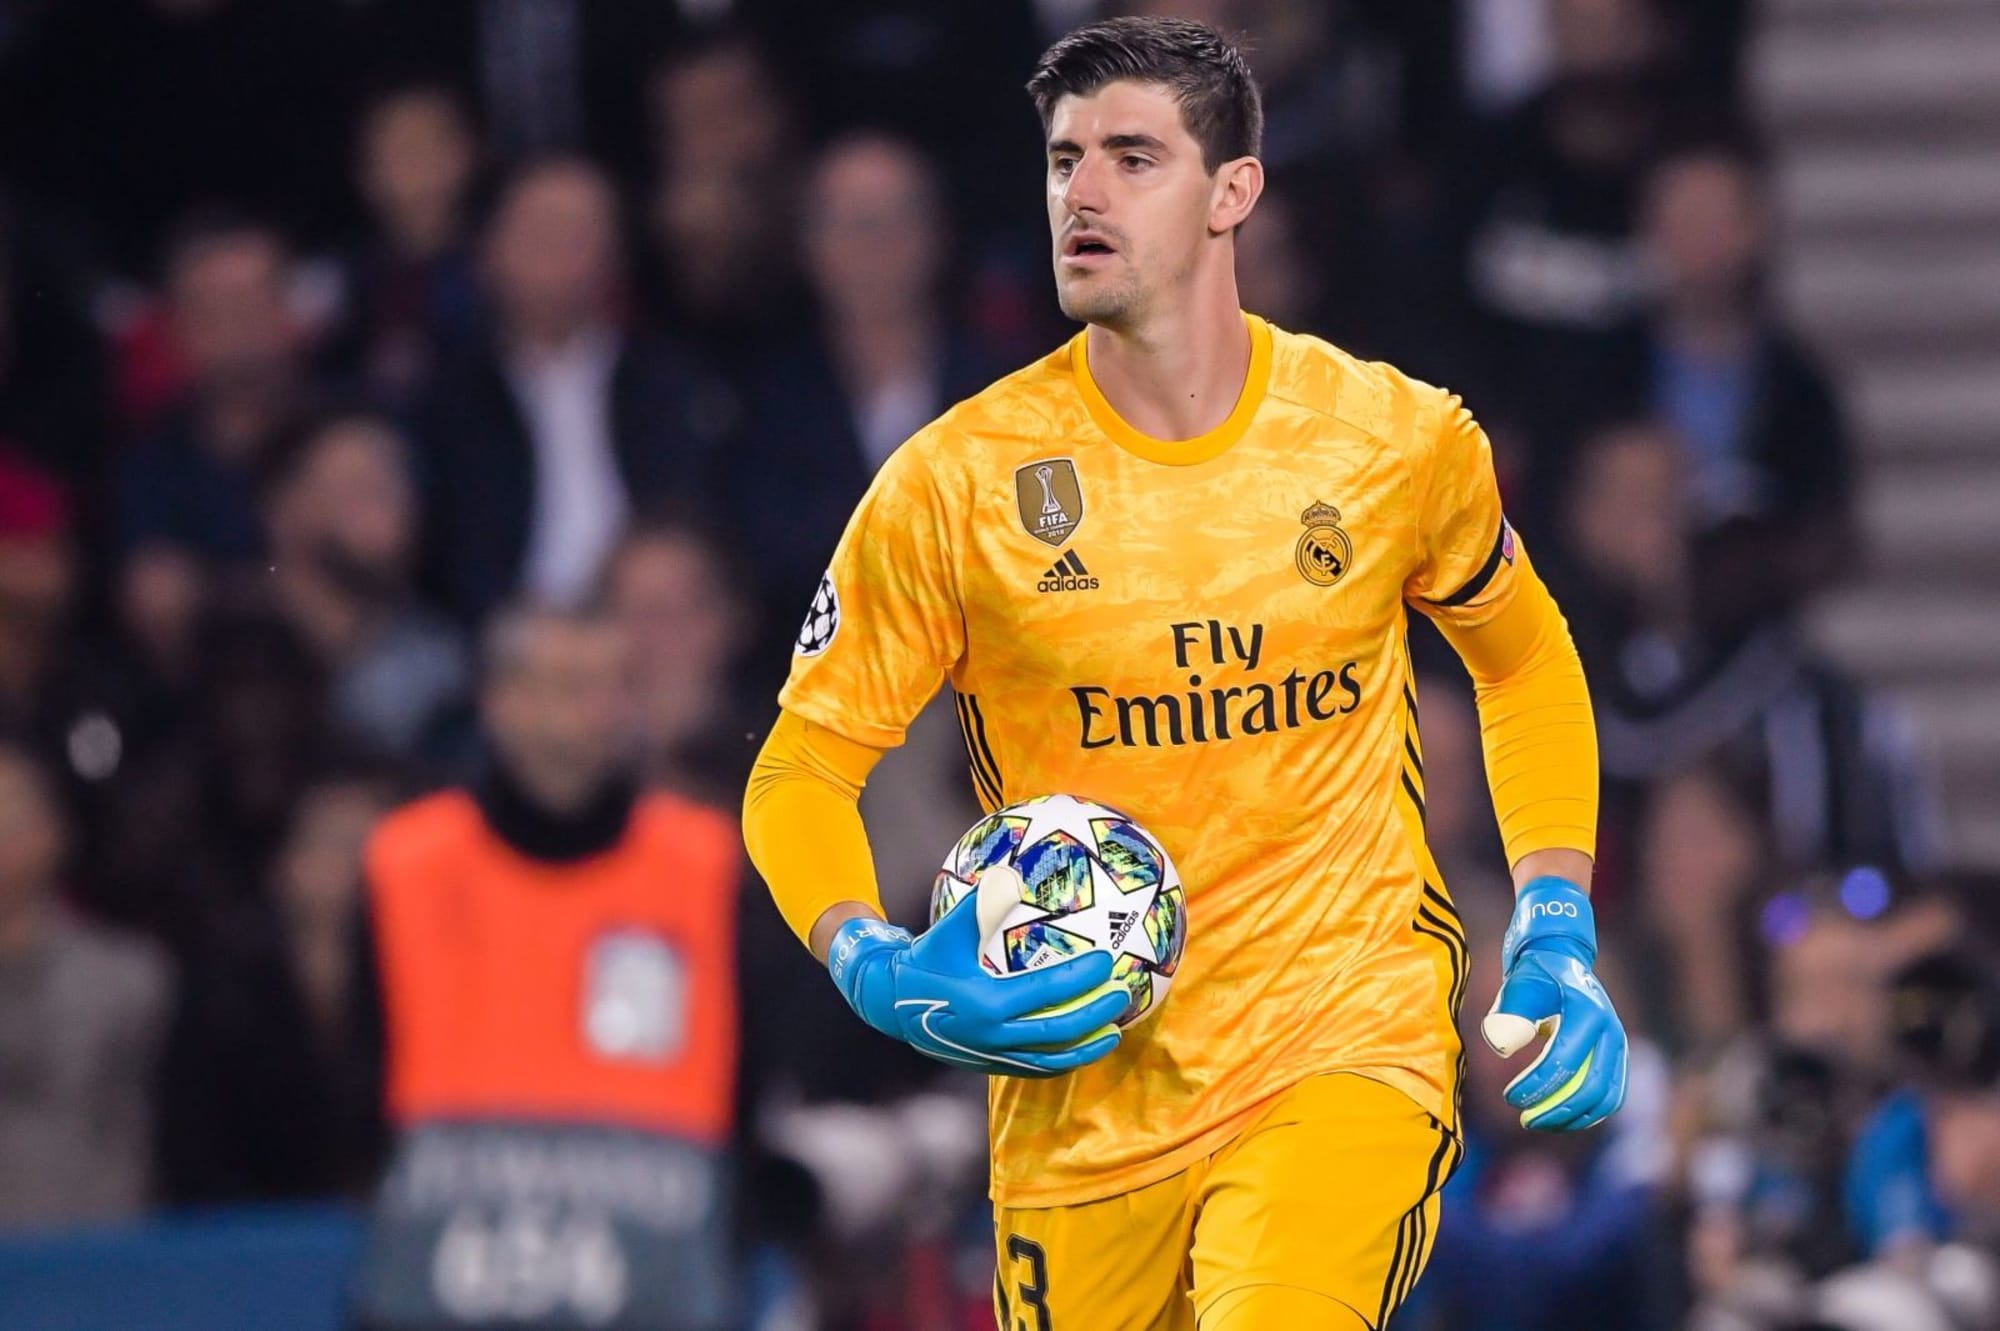 UCL: Real Madrid Will Avenge Last Season’s Defeat To Chelsea –Courtois